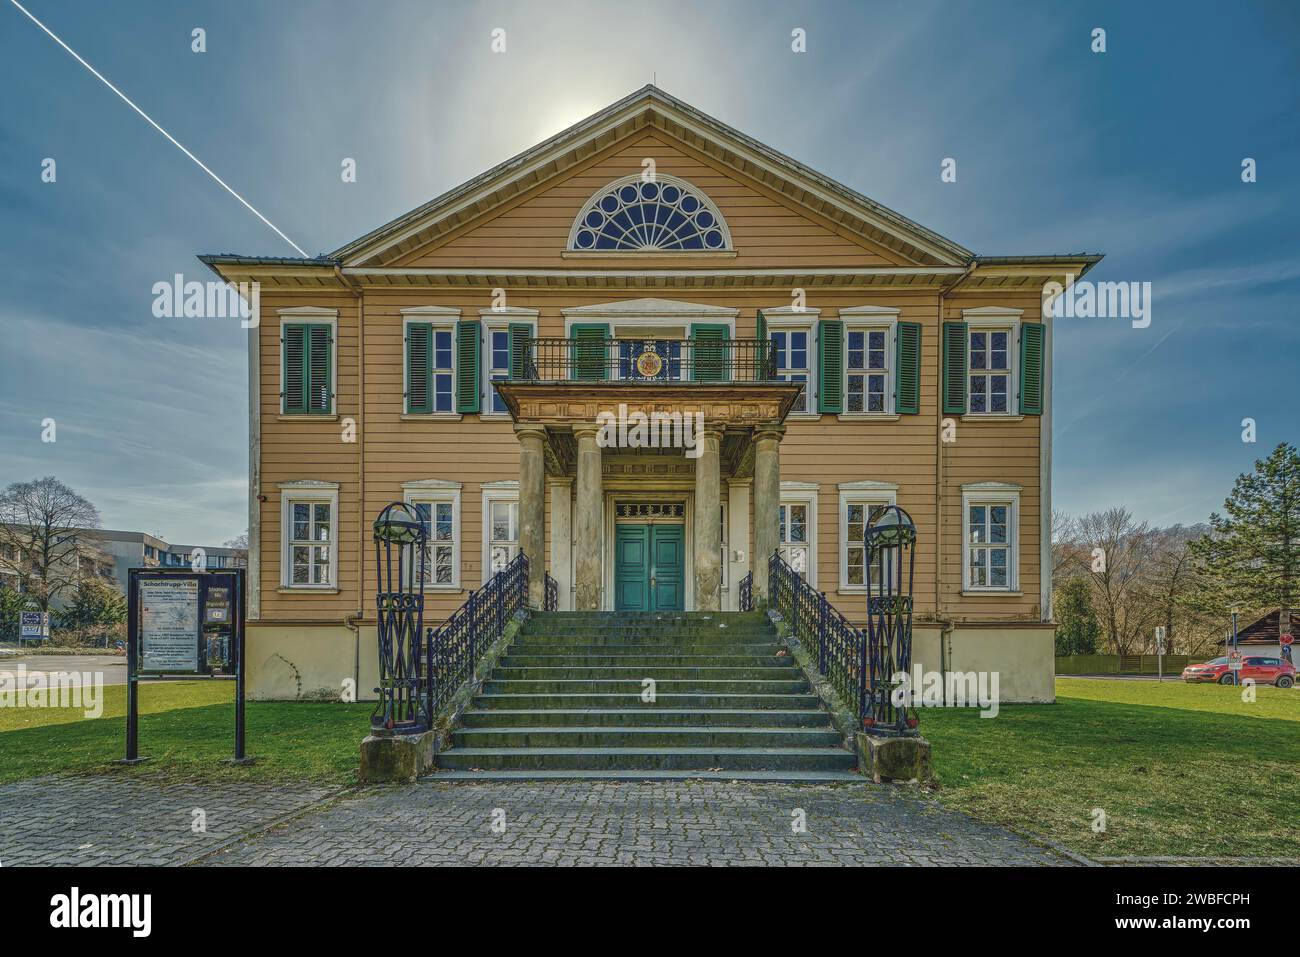 A classicist villa with steps and a symmetrical facade under a clear sky, Schachtrupp Villa, Lost Place, Osterode am Harz, Lower Saxony, Germany Stock Photo